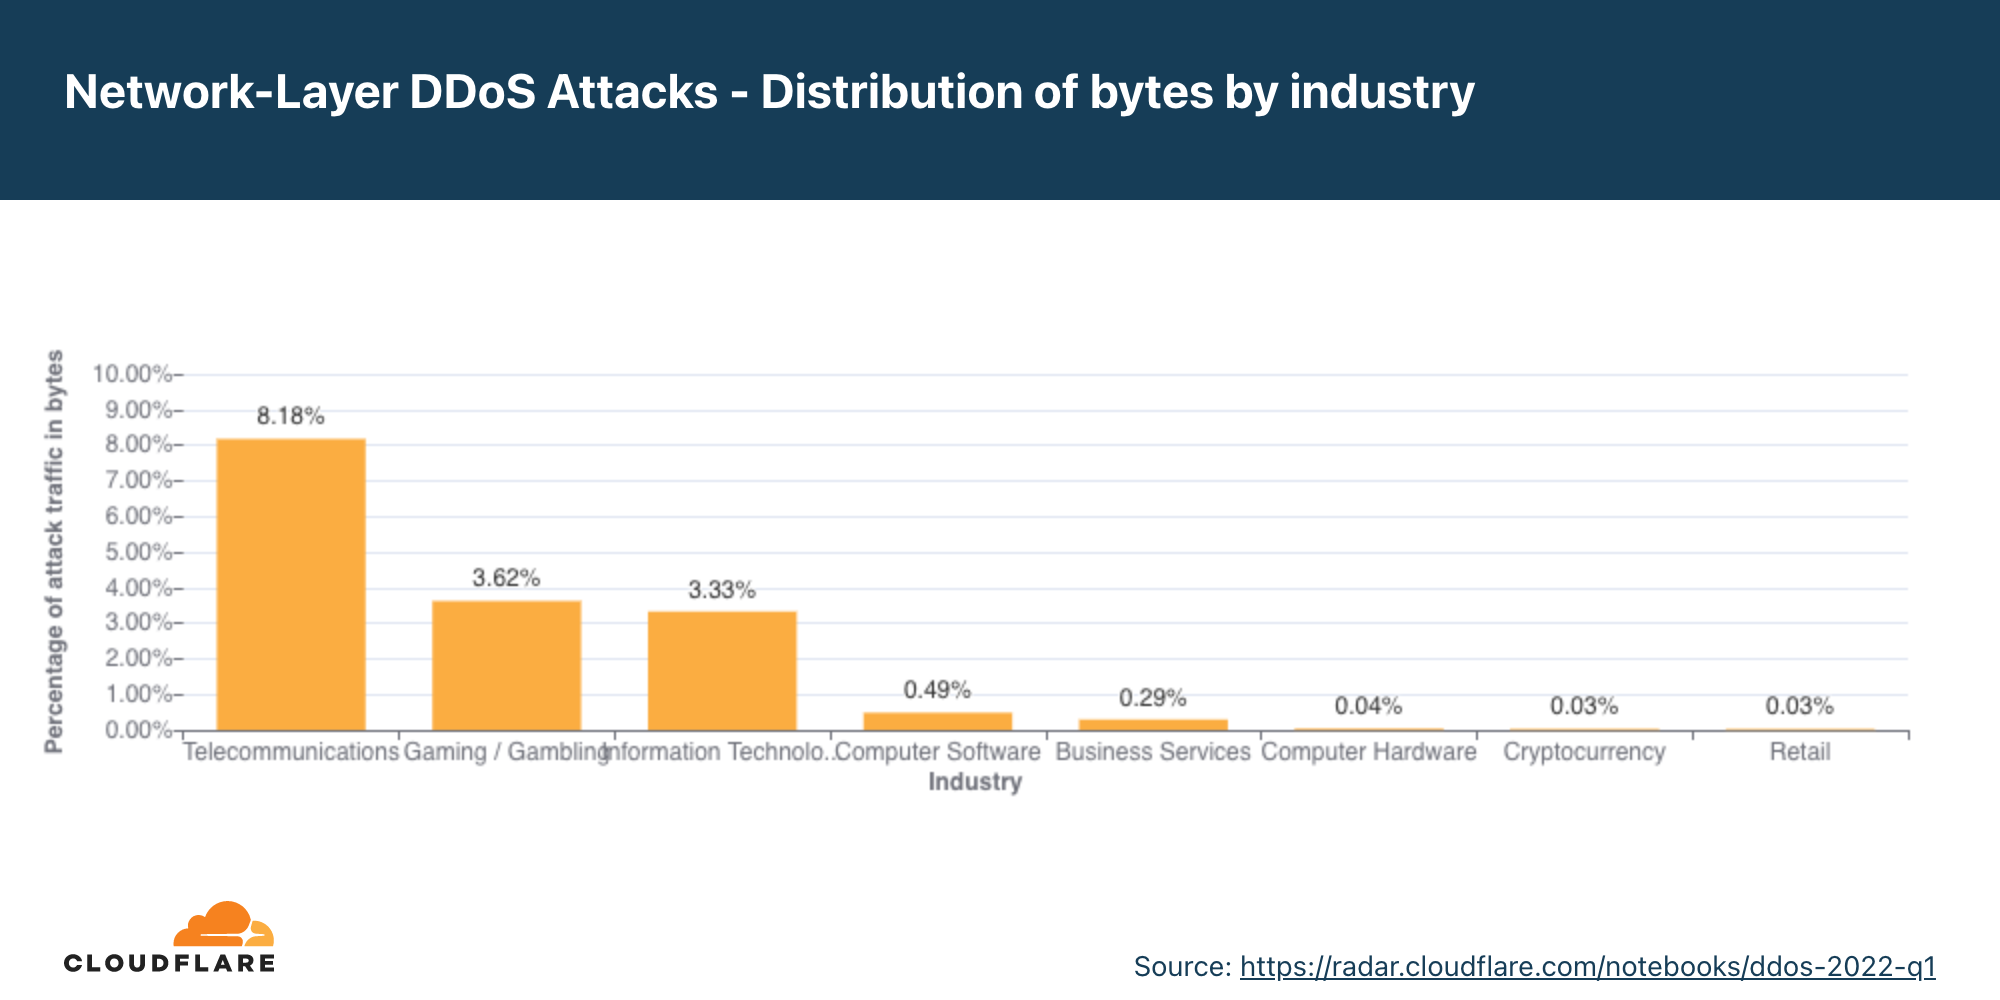 Graph of the distribution of network-layer DDoS attack bytes by industry